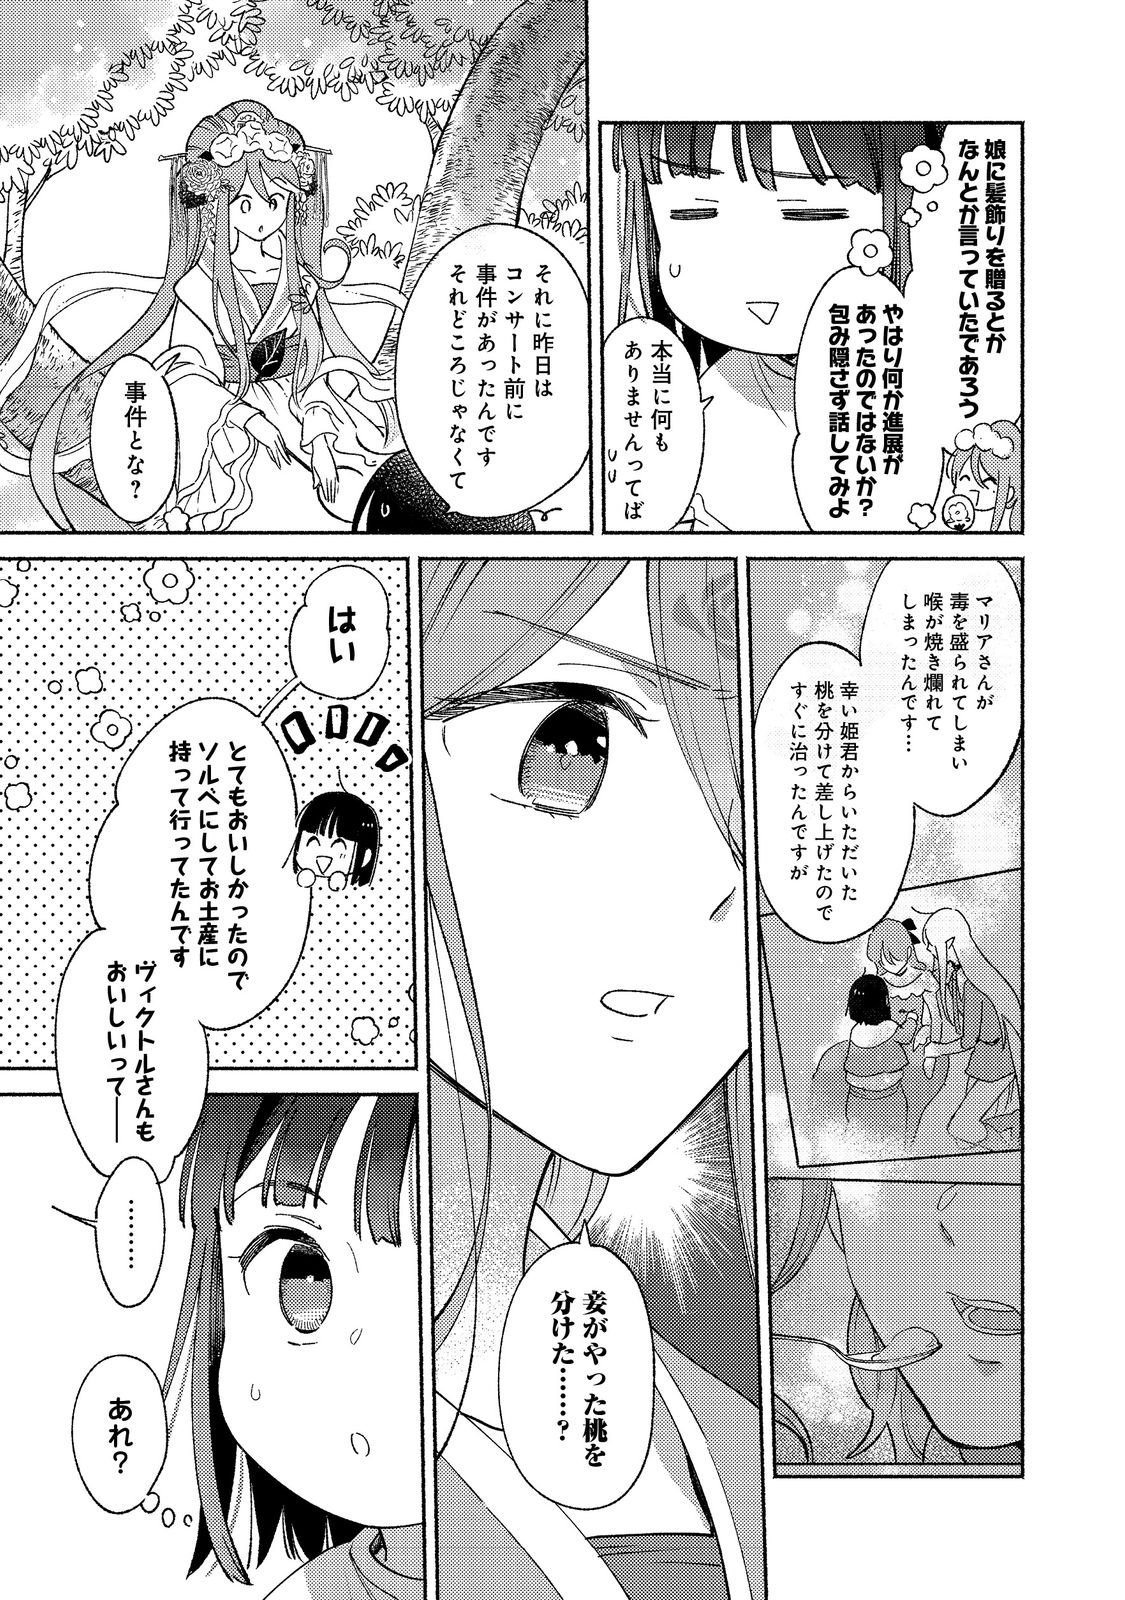 I’m the White Pig Nobleman 第16.1話 - Page 2